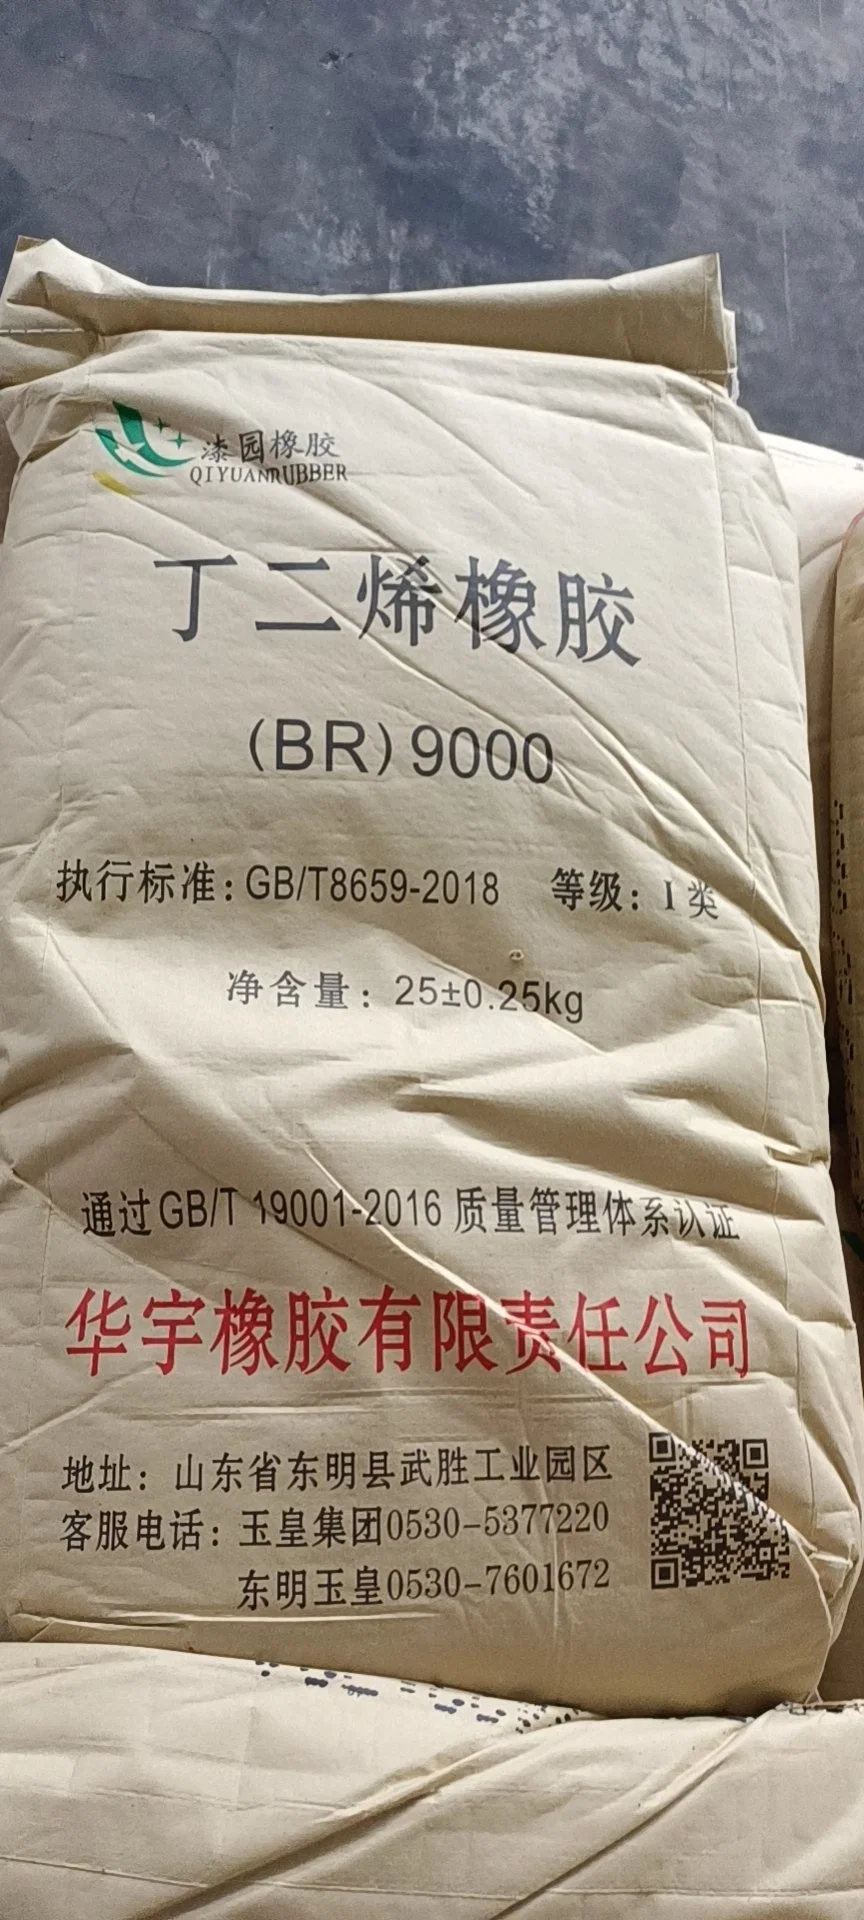 Br 9000 Synthetic Rubber Butadiene Rubber (Huayu brand)